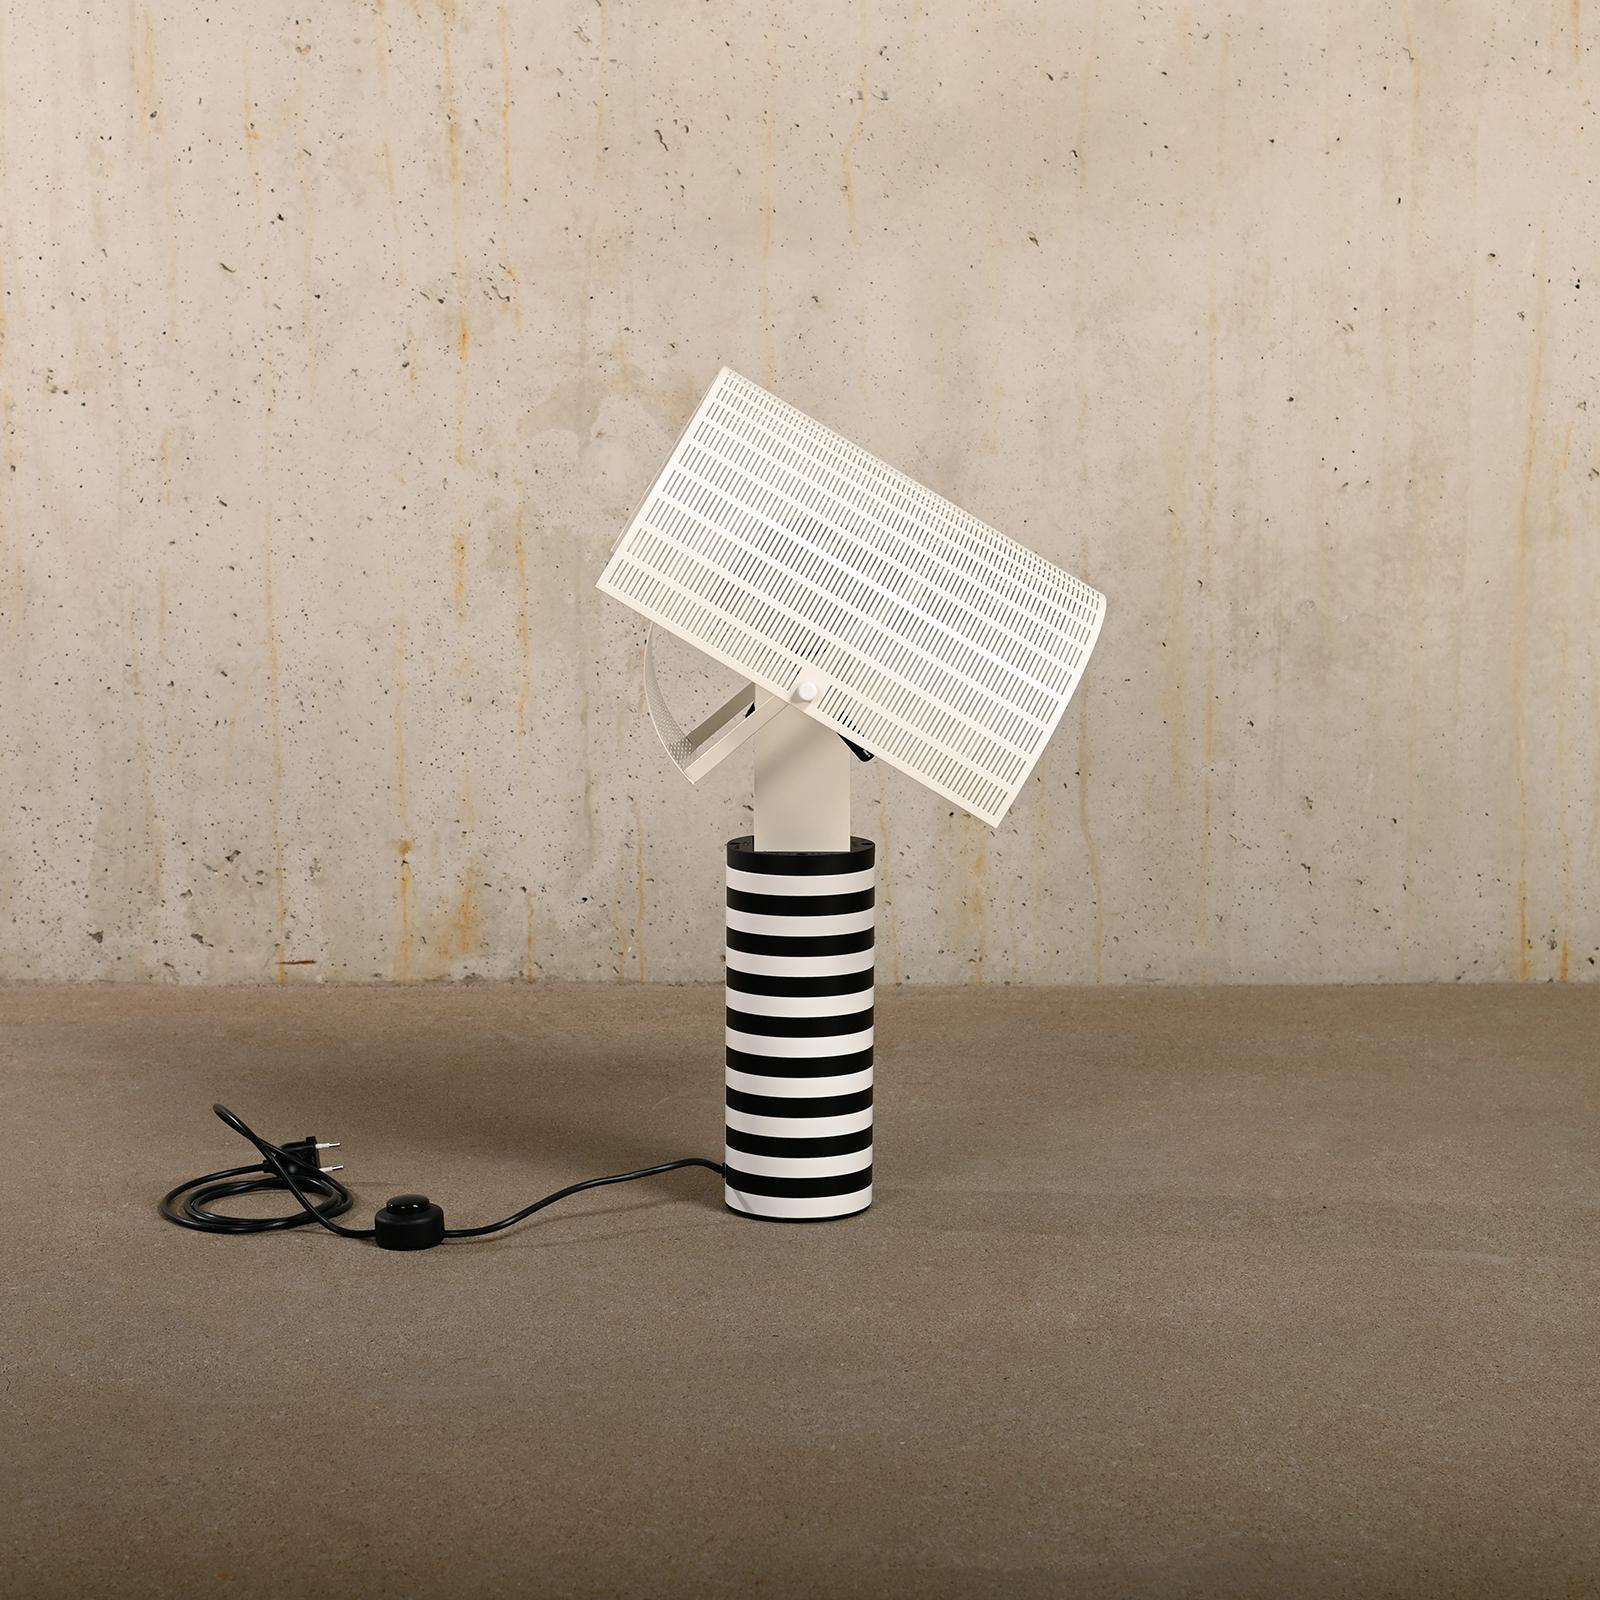 Painted Mario Botta Shogun Table Lamp in black and white for Artemide, Italy For Sale